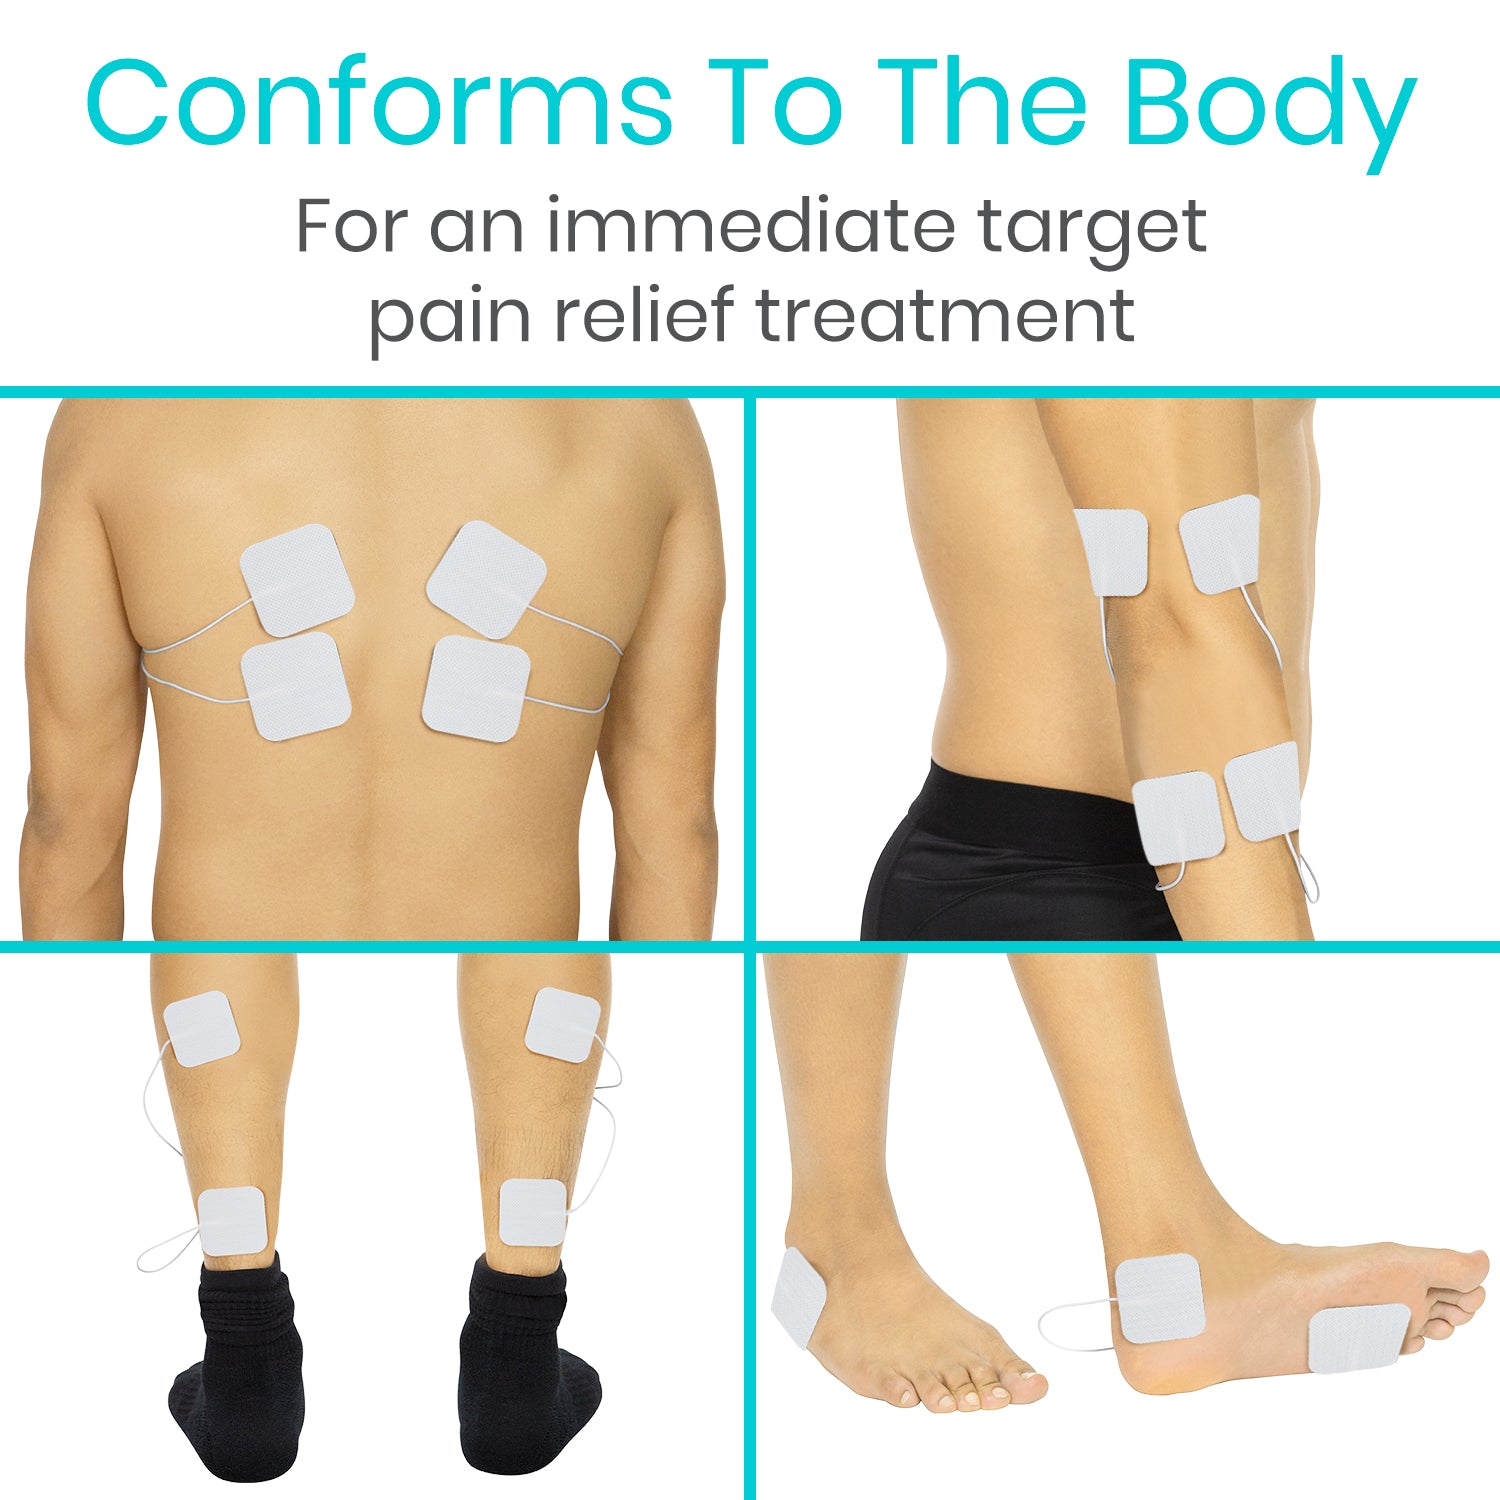 TENS Unit: Non-Drug Pain Relief For The Foot